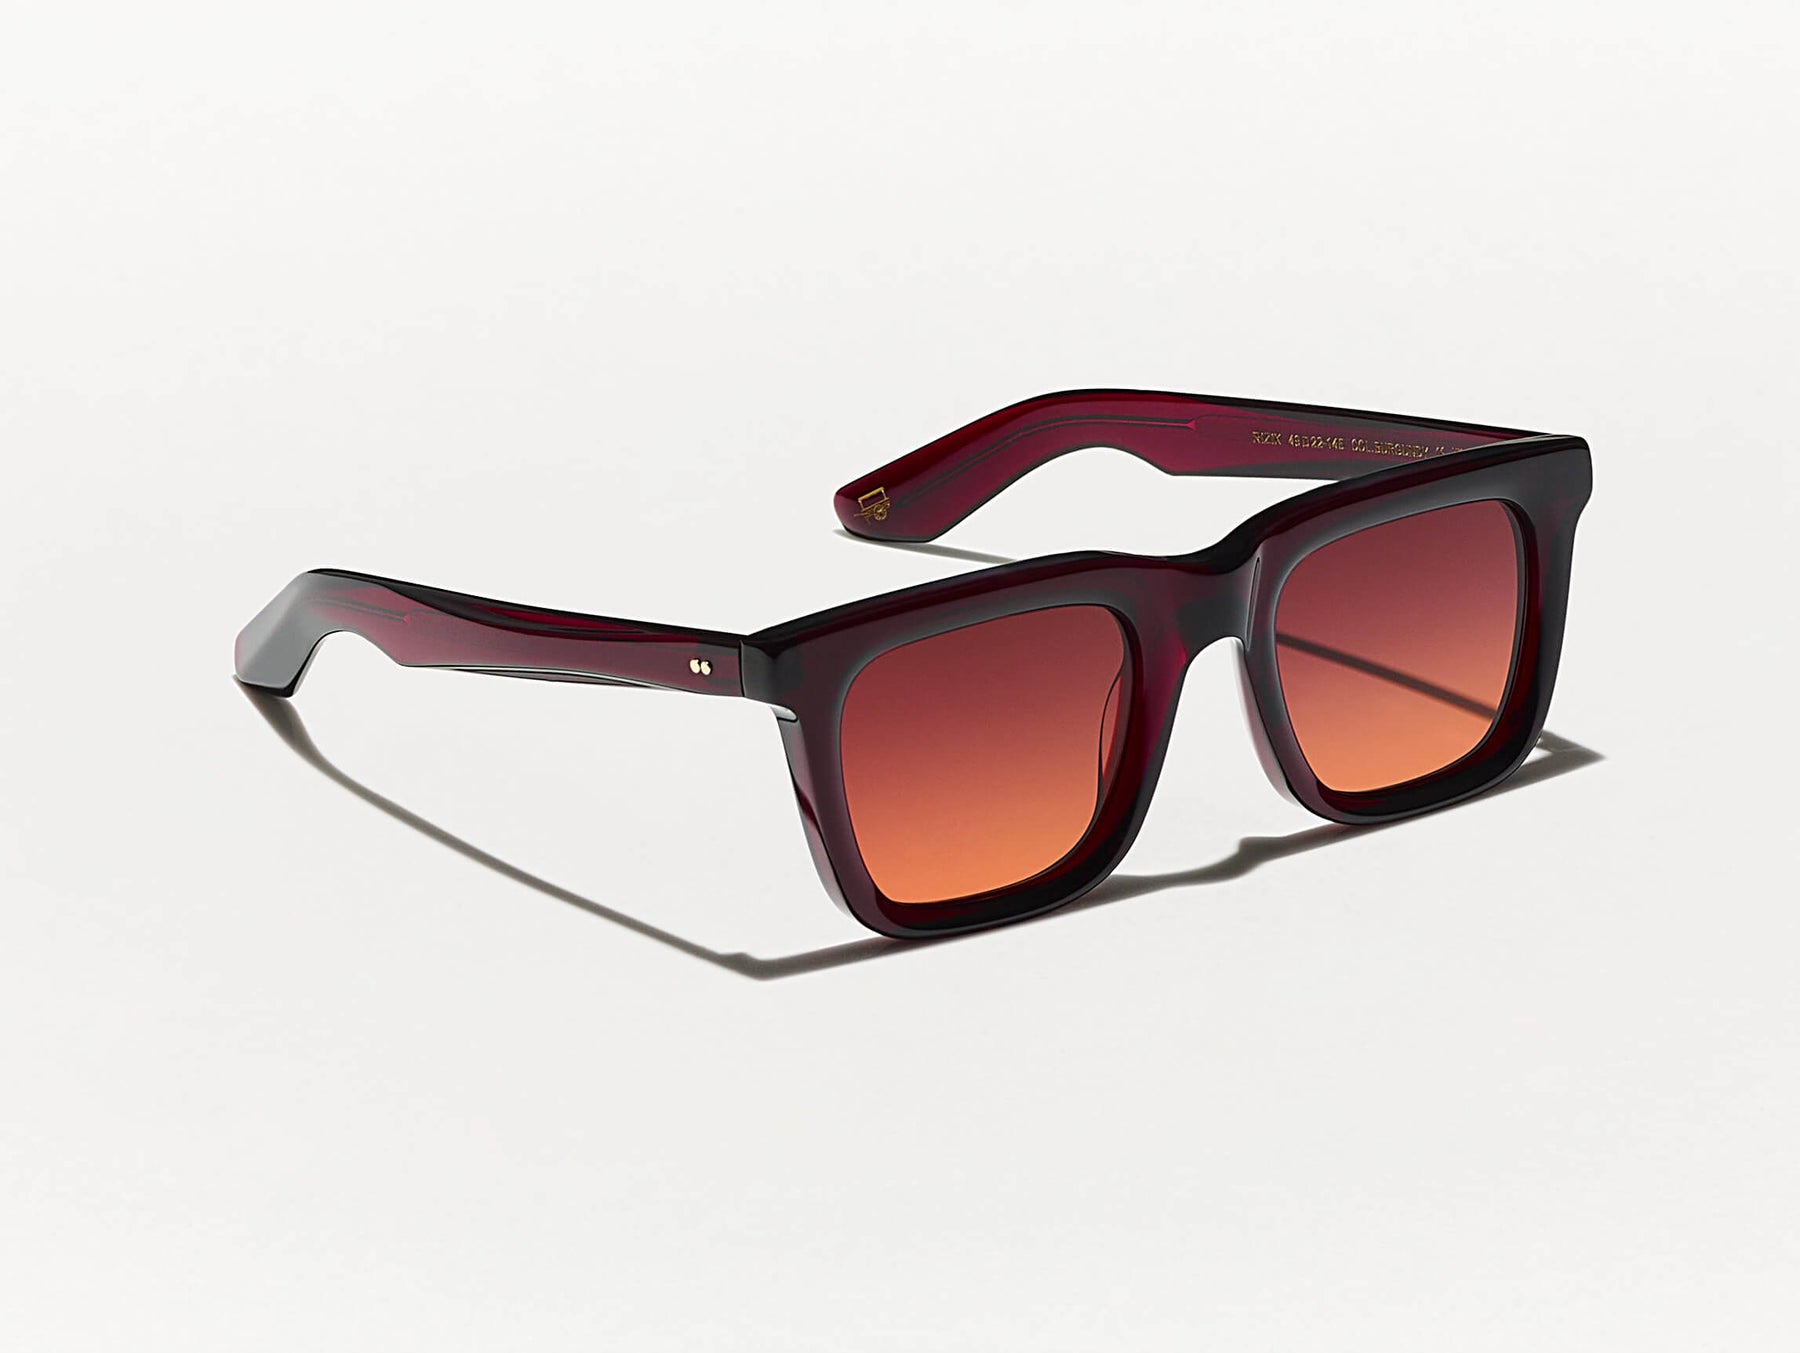 The RIZIK SUN in Burgundy with Cabernet Tinted Lenses